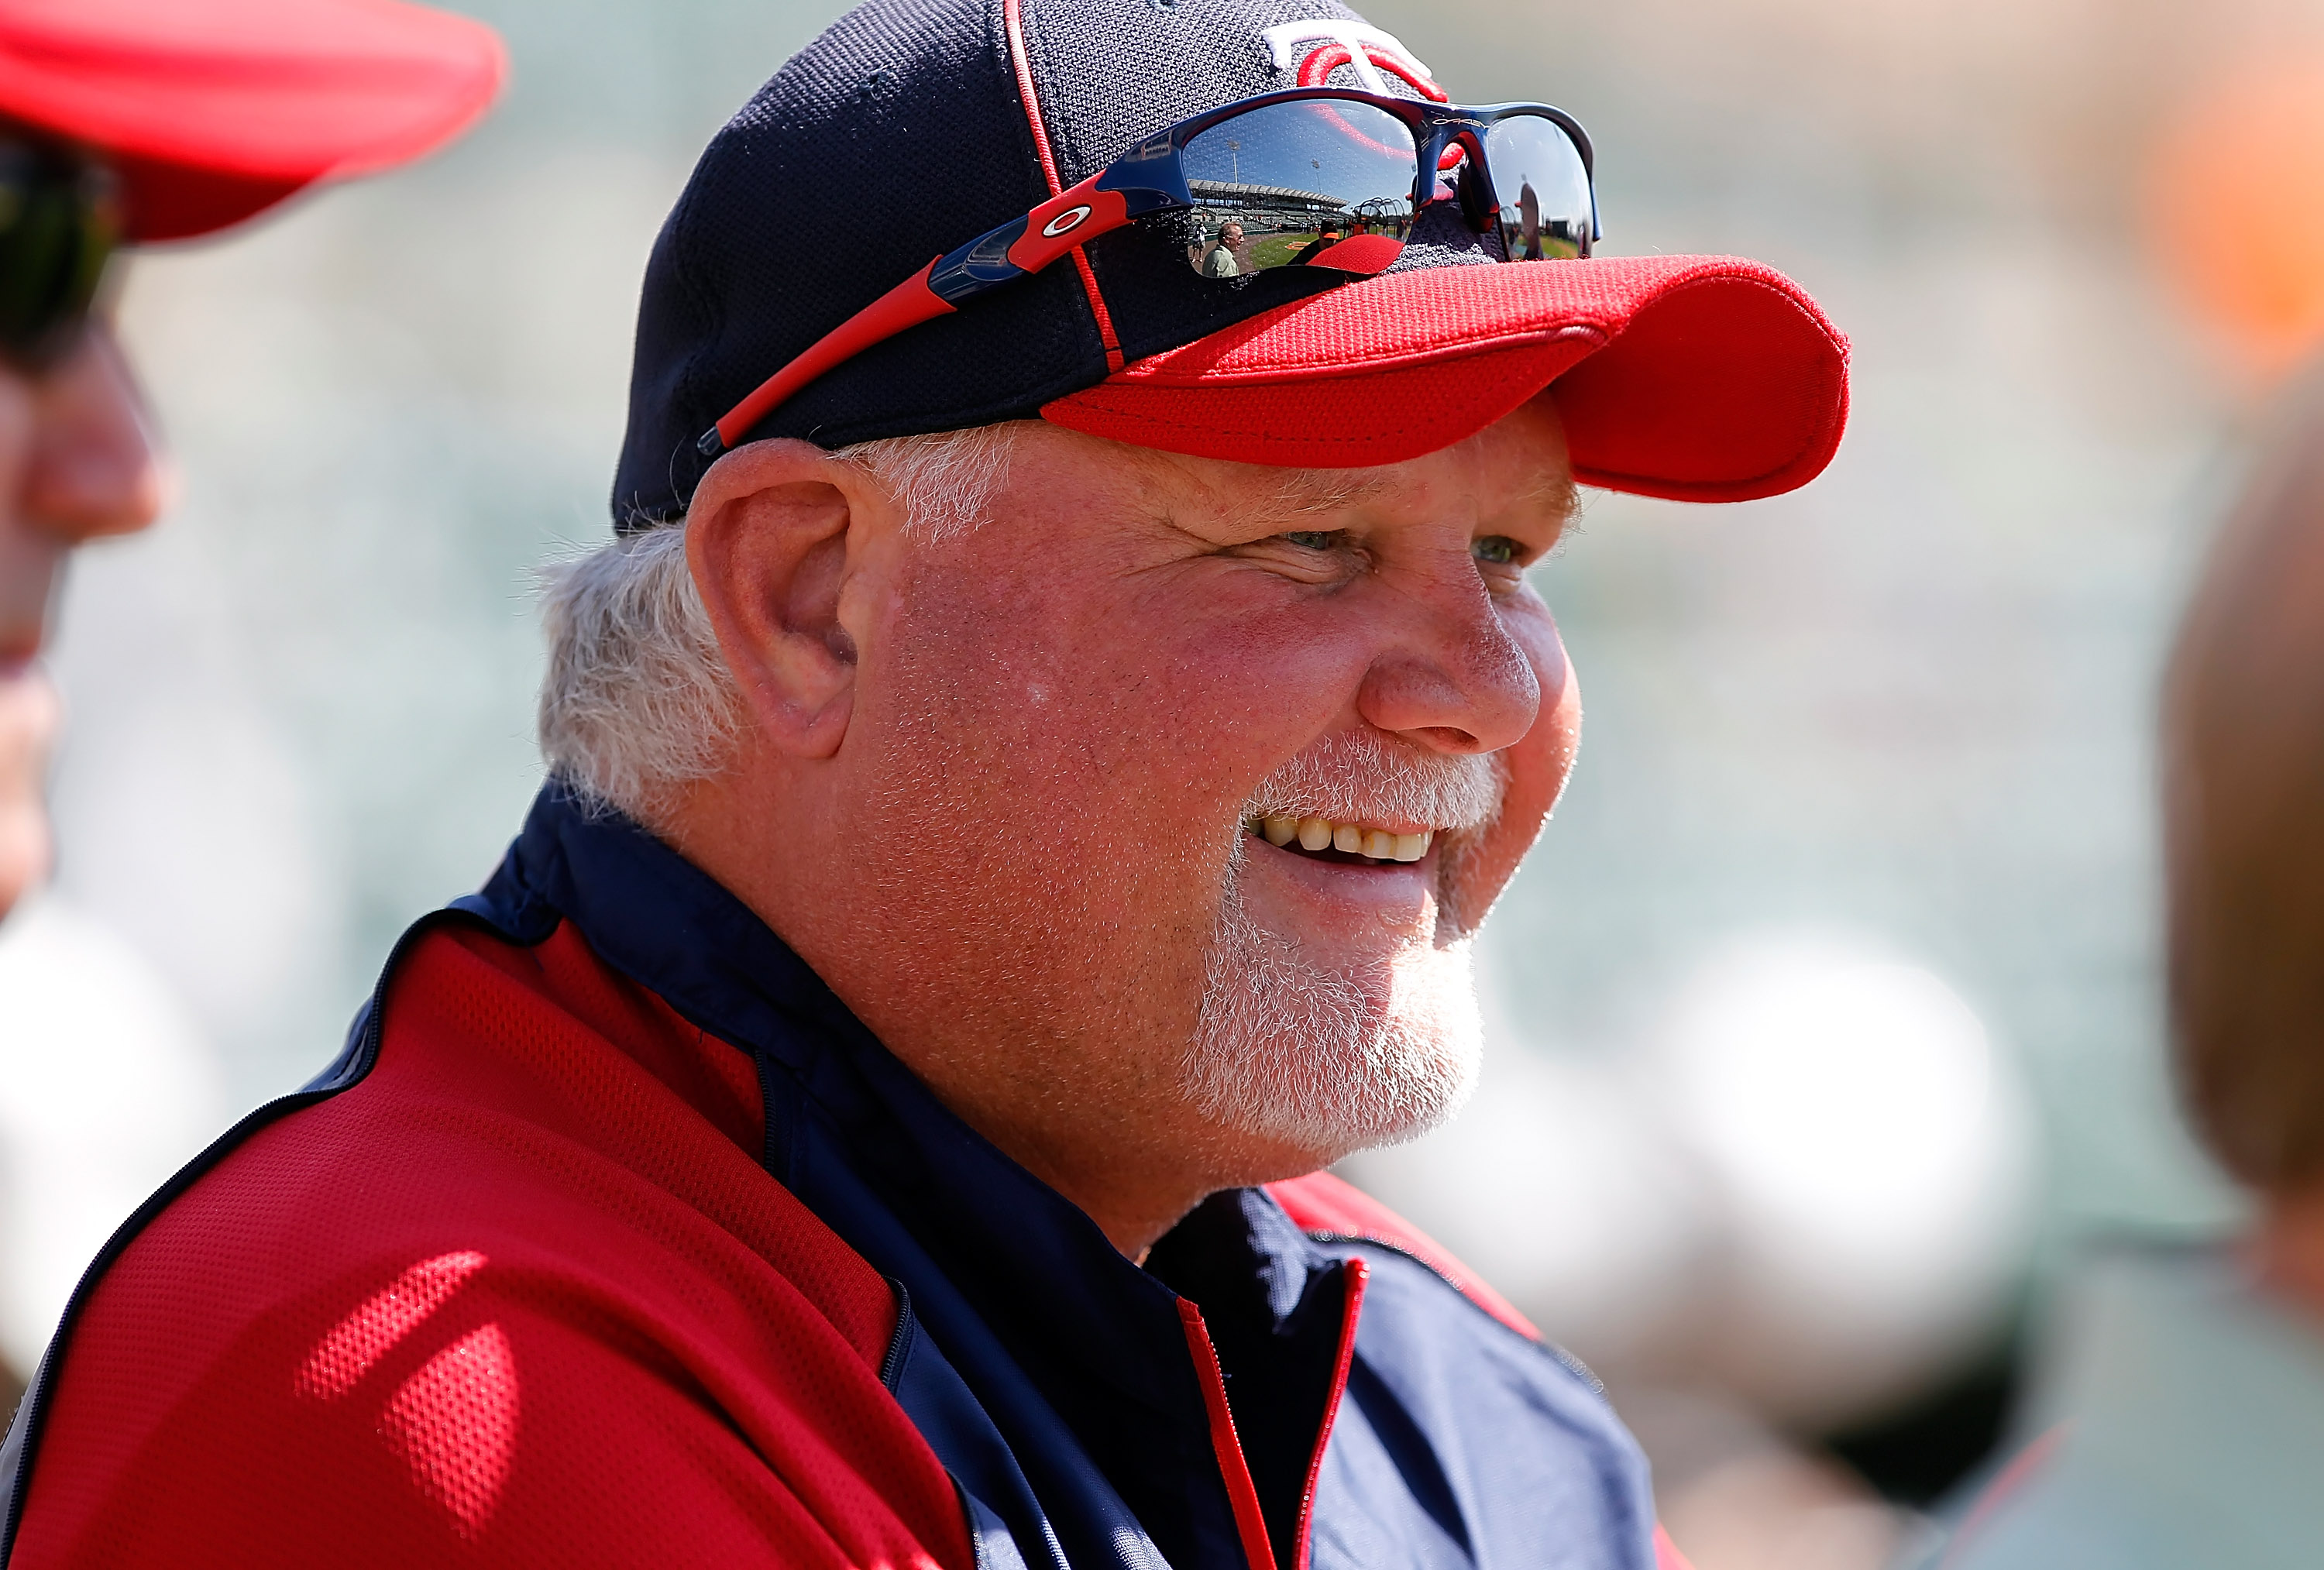 It's been a rough start for Ron Gardenhire and the Twins.